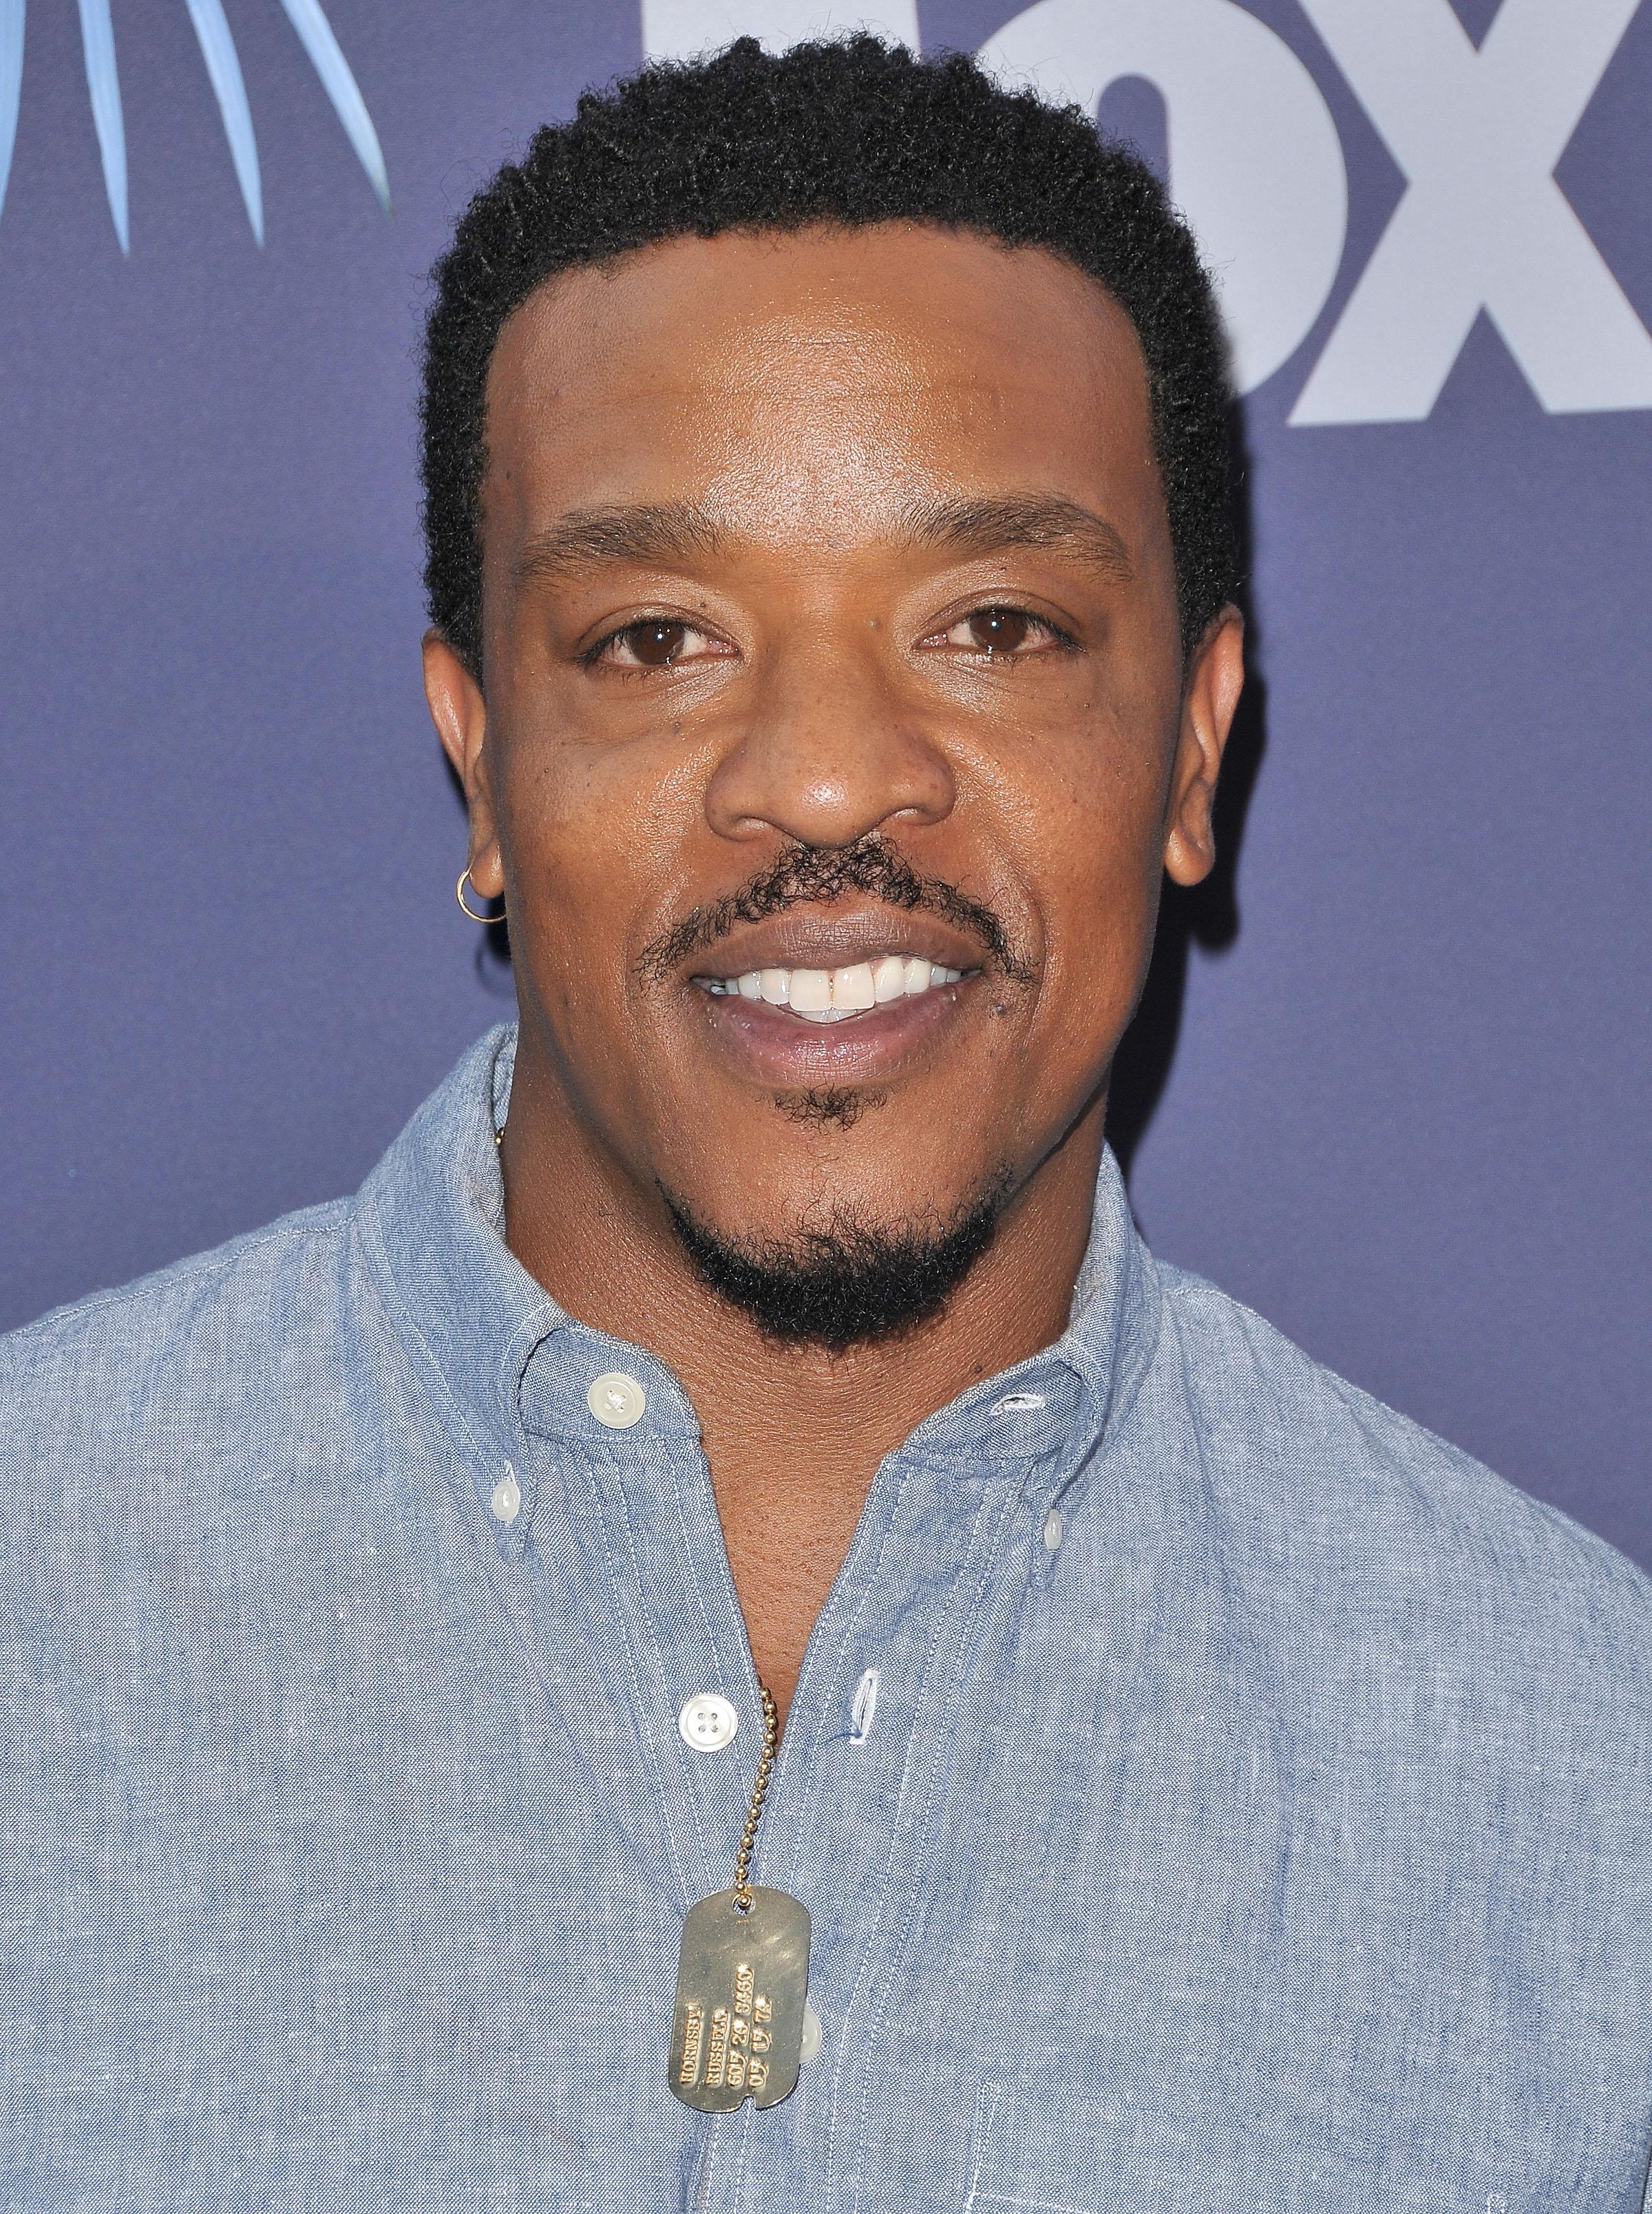 What Are You Willing To Die For Russell Hornsby Discusses His Breakout The Hate U Give Role The Spokesman Review